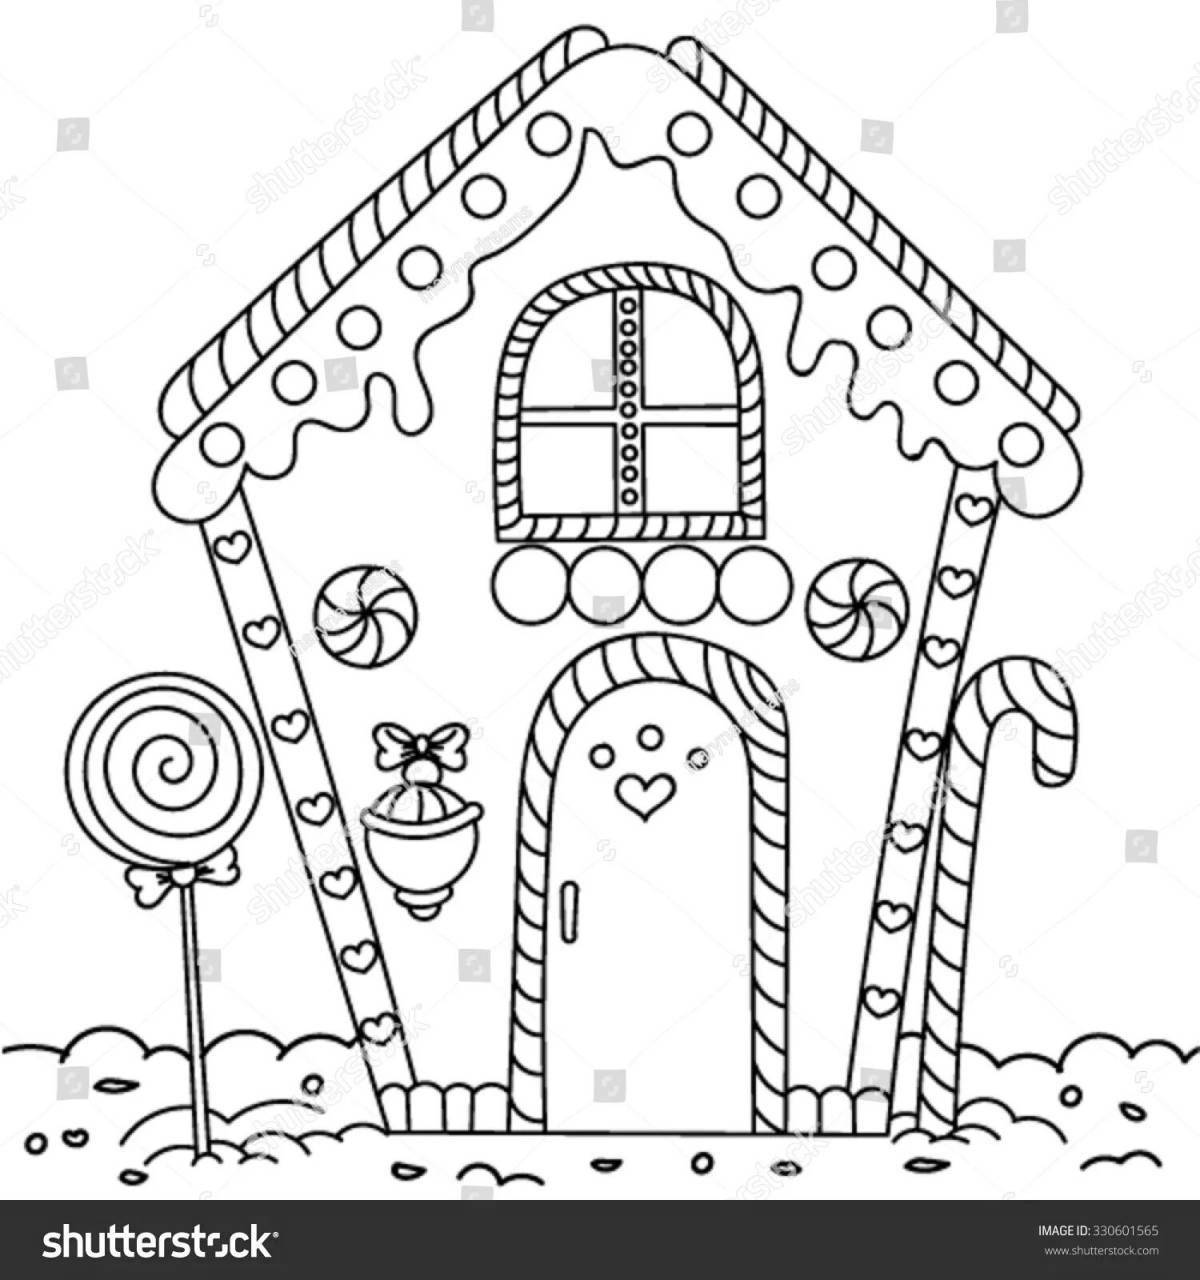 Fantastic houses coloring book for 4-5 year olds